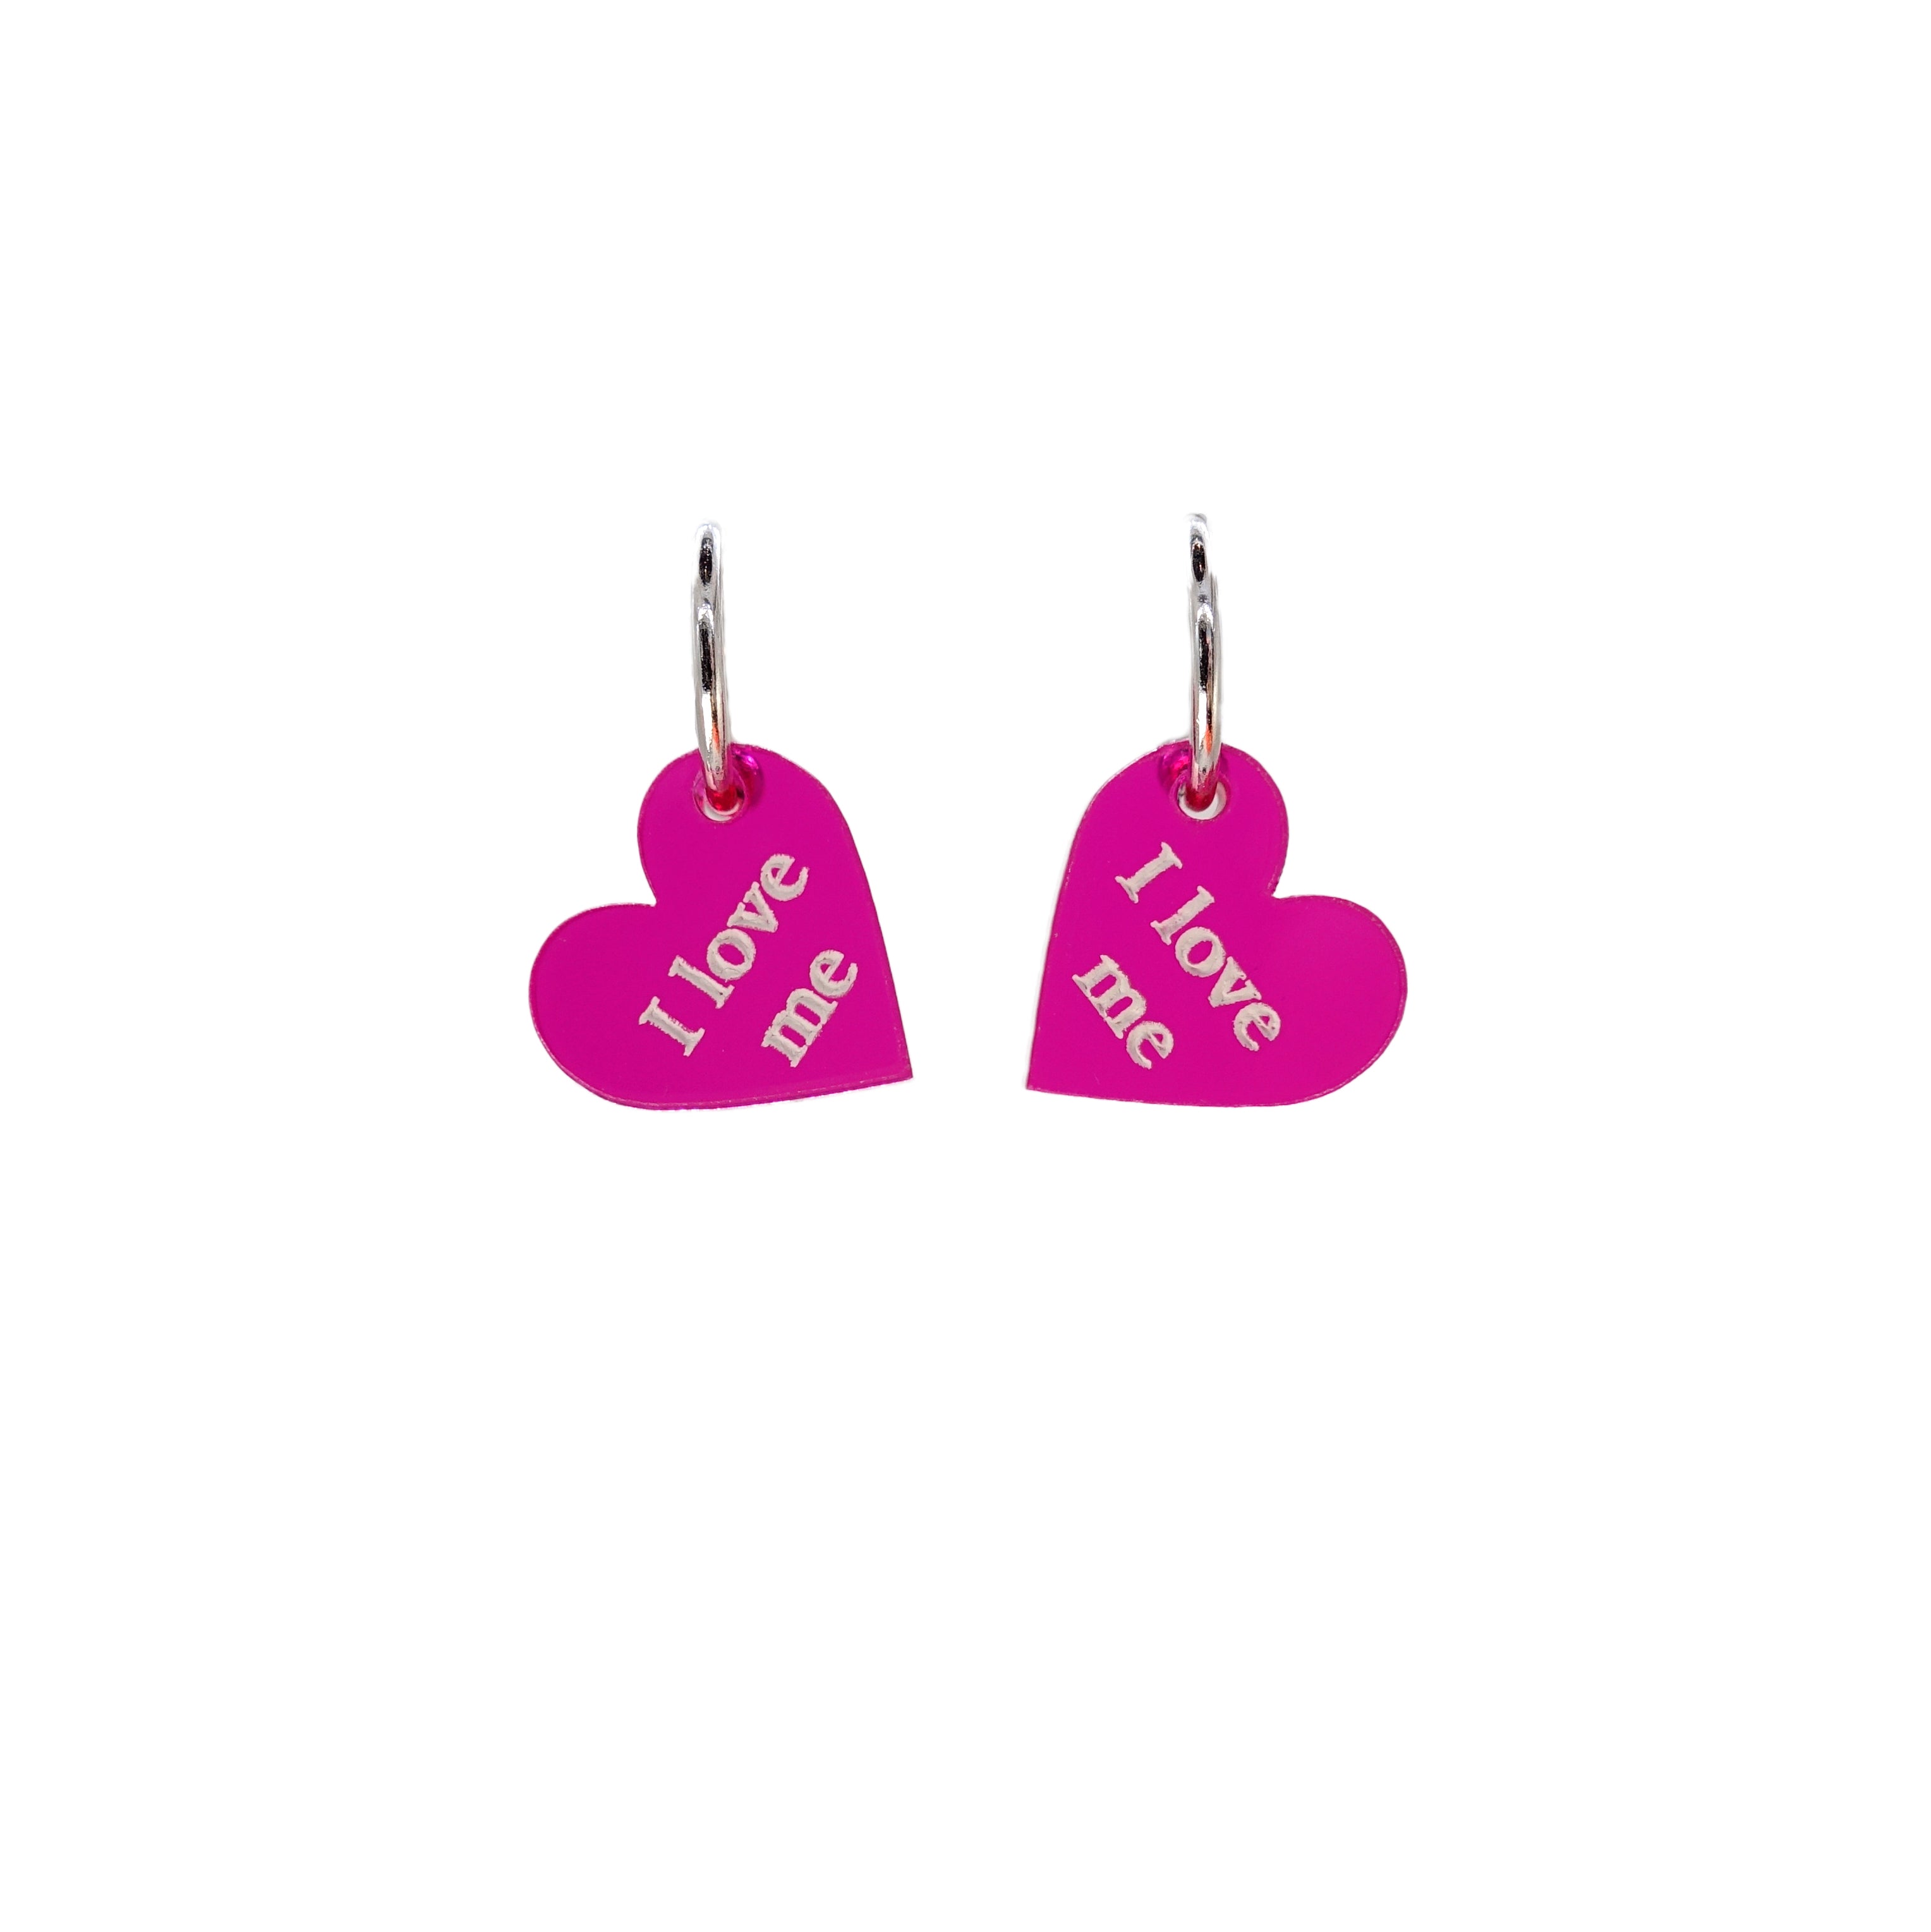 Small I Love Me etched heart earrings in transparent hot pink on sterling silver plated hoops. 